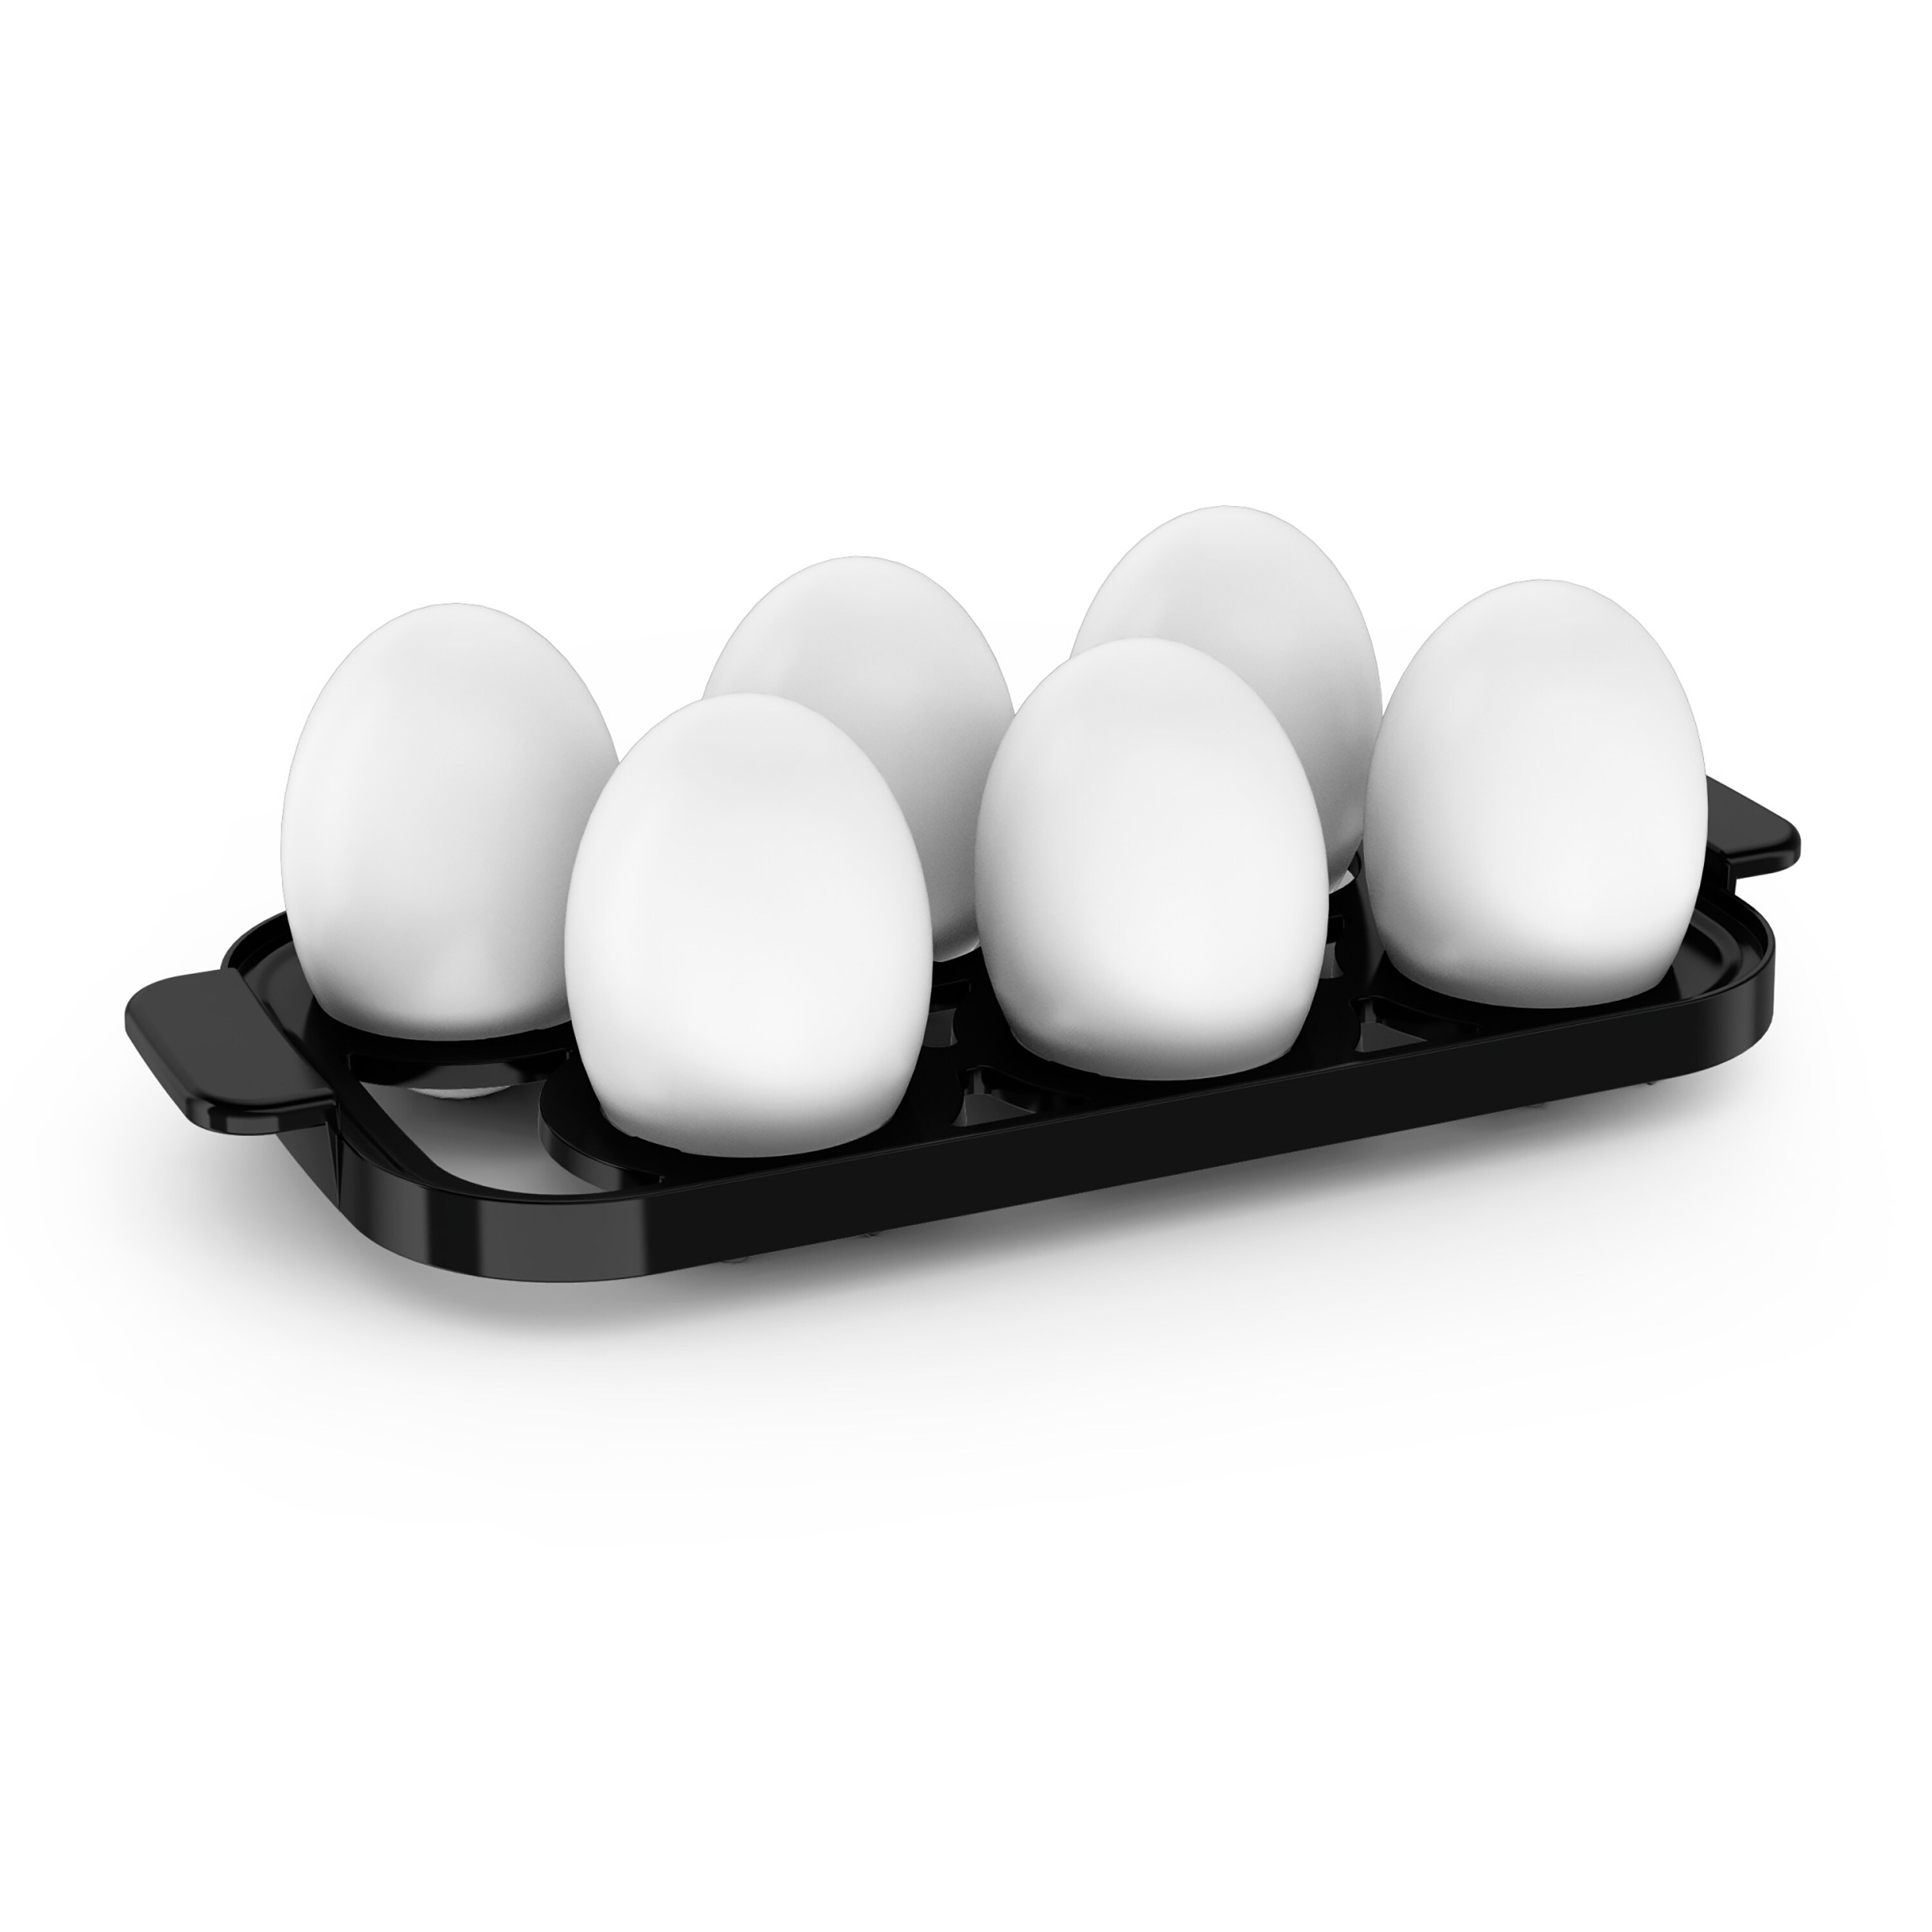 https://ak1.ostkcdn.com/images/products/is/images/direct/1edf530046fec65213982baf474299847d3d6b65/KRUPS-KW221850-Simply-Electric-Egg-Cooker-with-Accessories%2C-6-Egg-Capacity.jpg